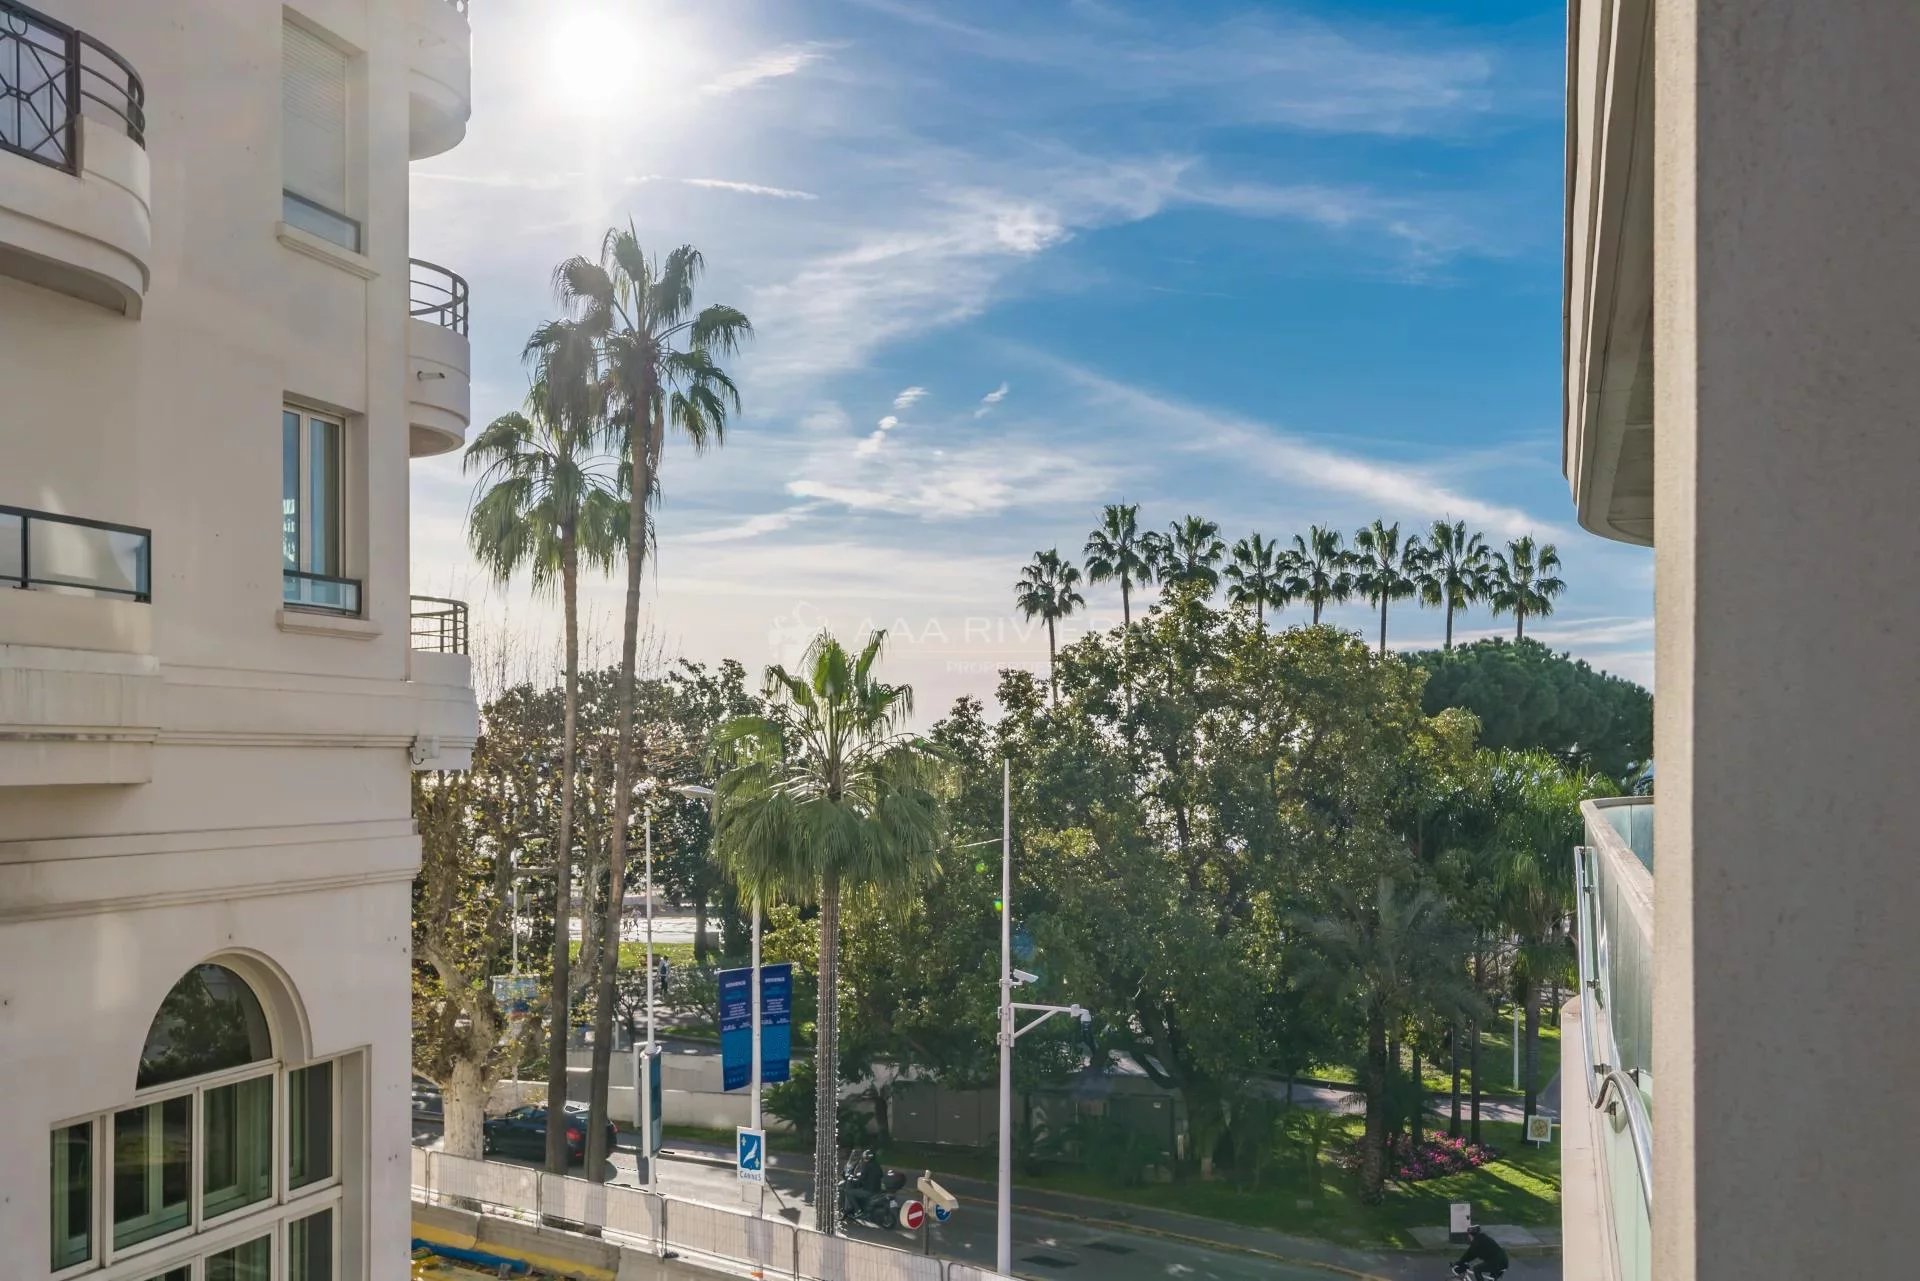 CANNES - Exceptional location meters from the Festival Palace